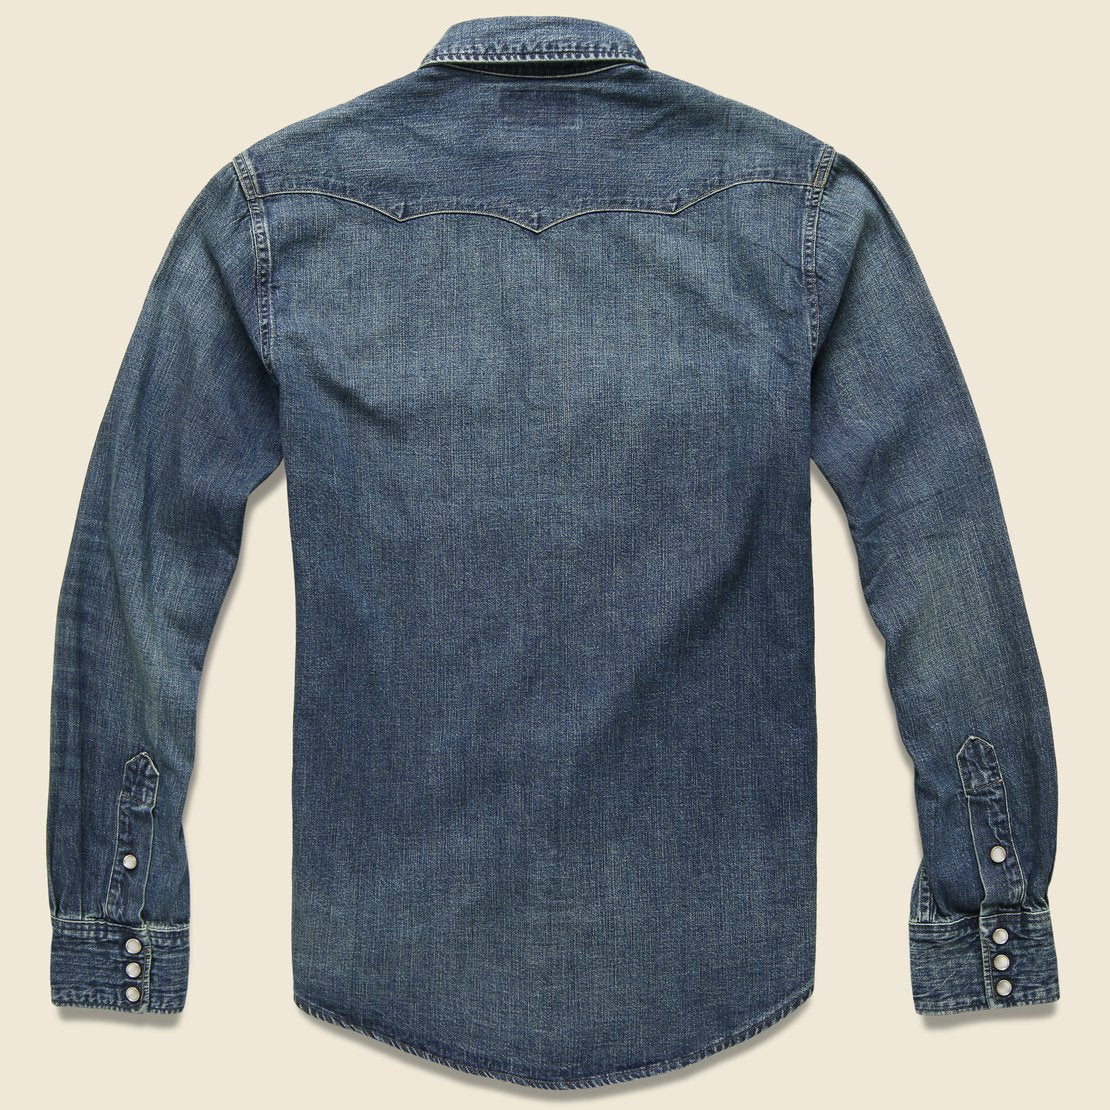 Thread & Supply Denim Peplum Shirt (Extended Sizes Available) at Dry Goods